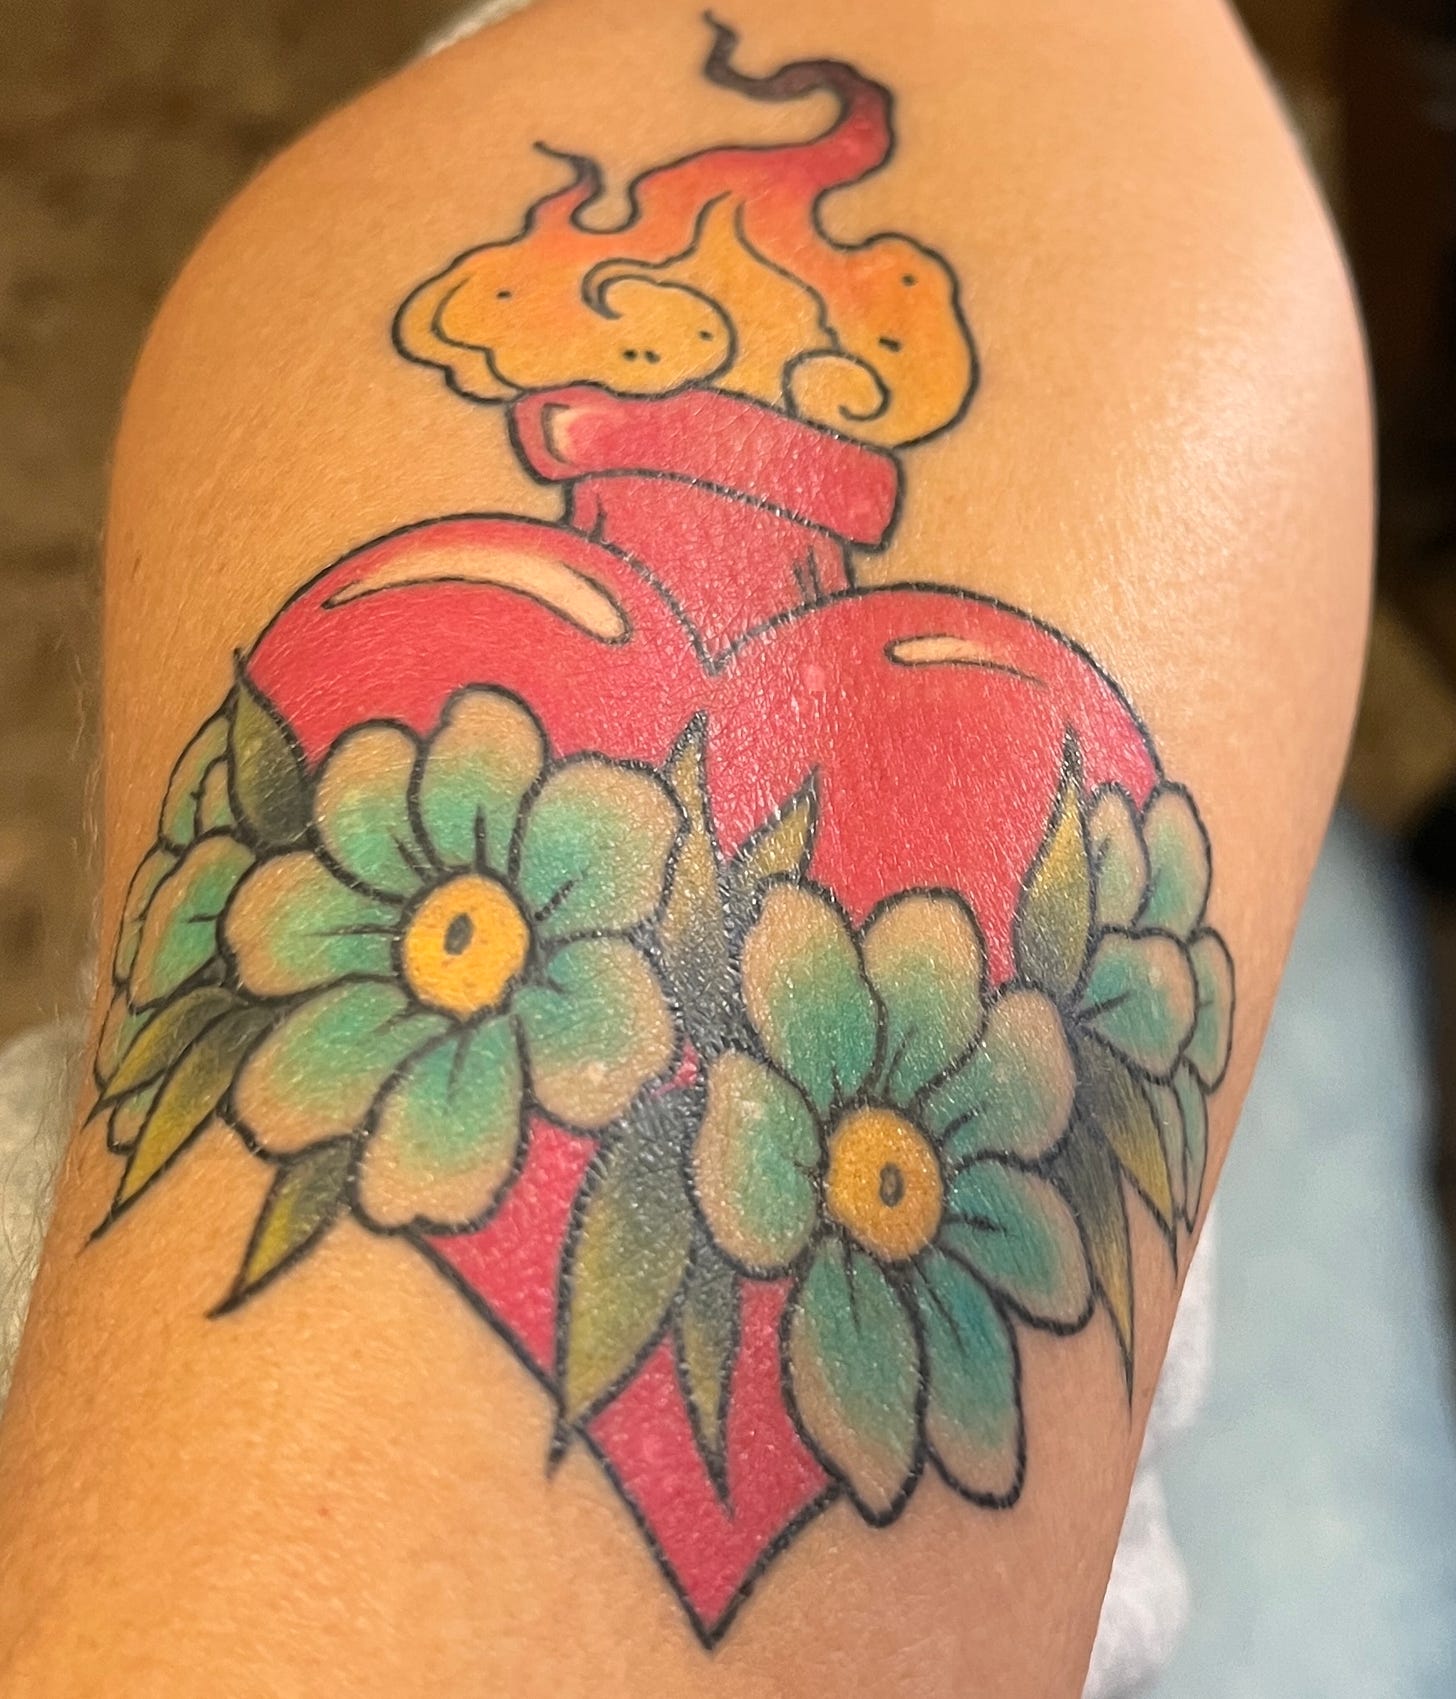 A tattoo on a tan-colored forearm of a red heart crossed with florals and with flame coming out of the top.